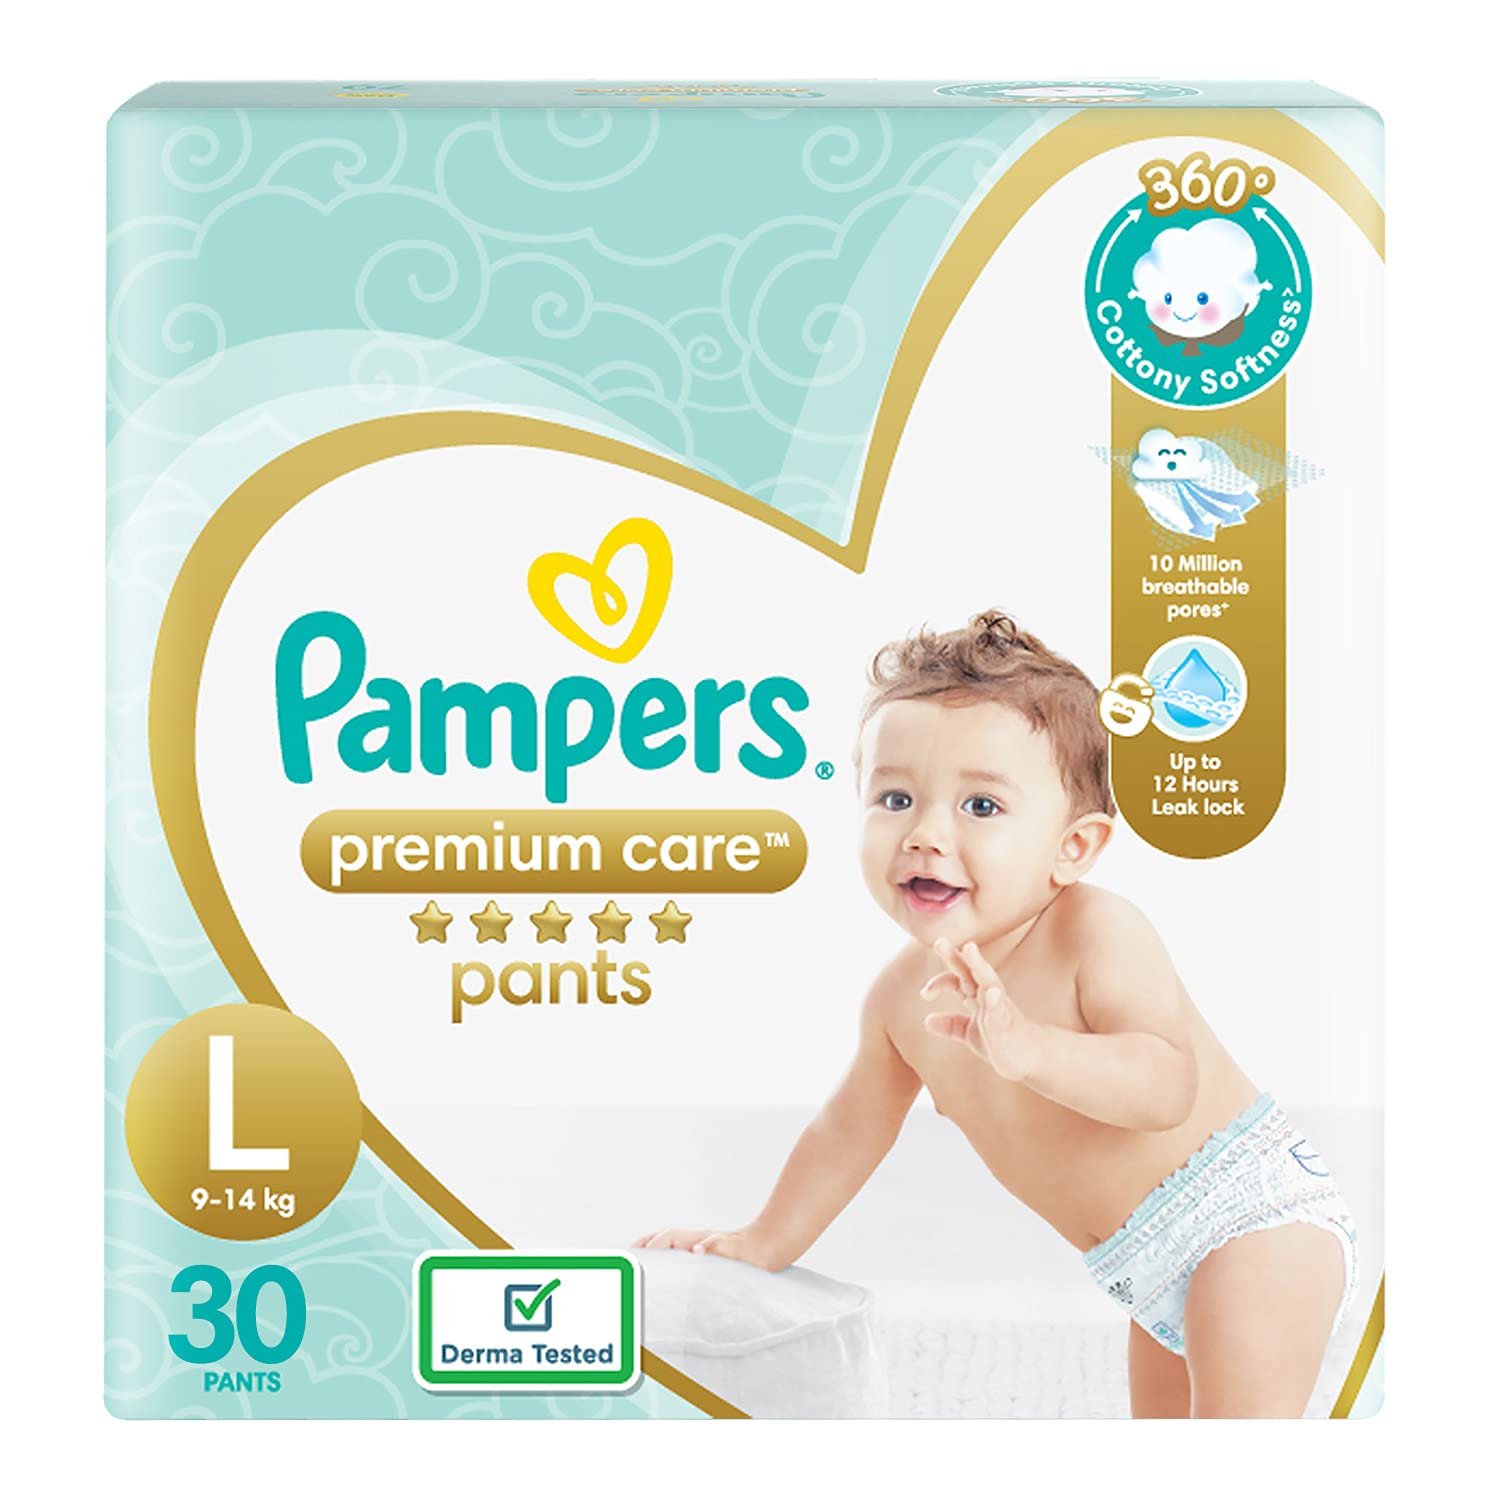 Bundle of 6 Packs] Pampers Premium Care Pants - XL to XXL | Shopee Singapore